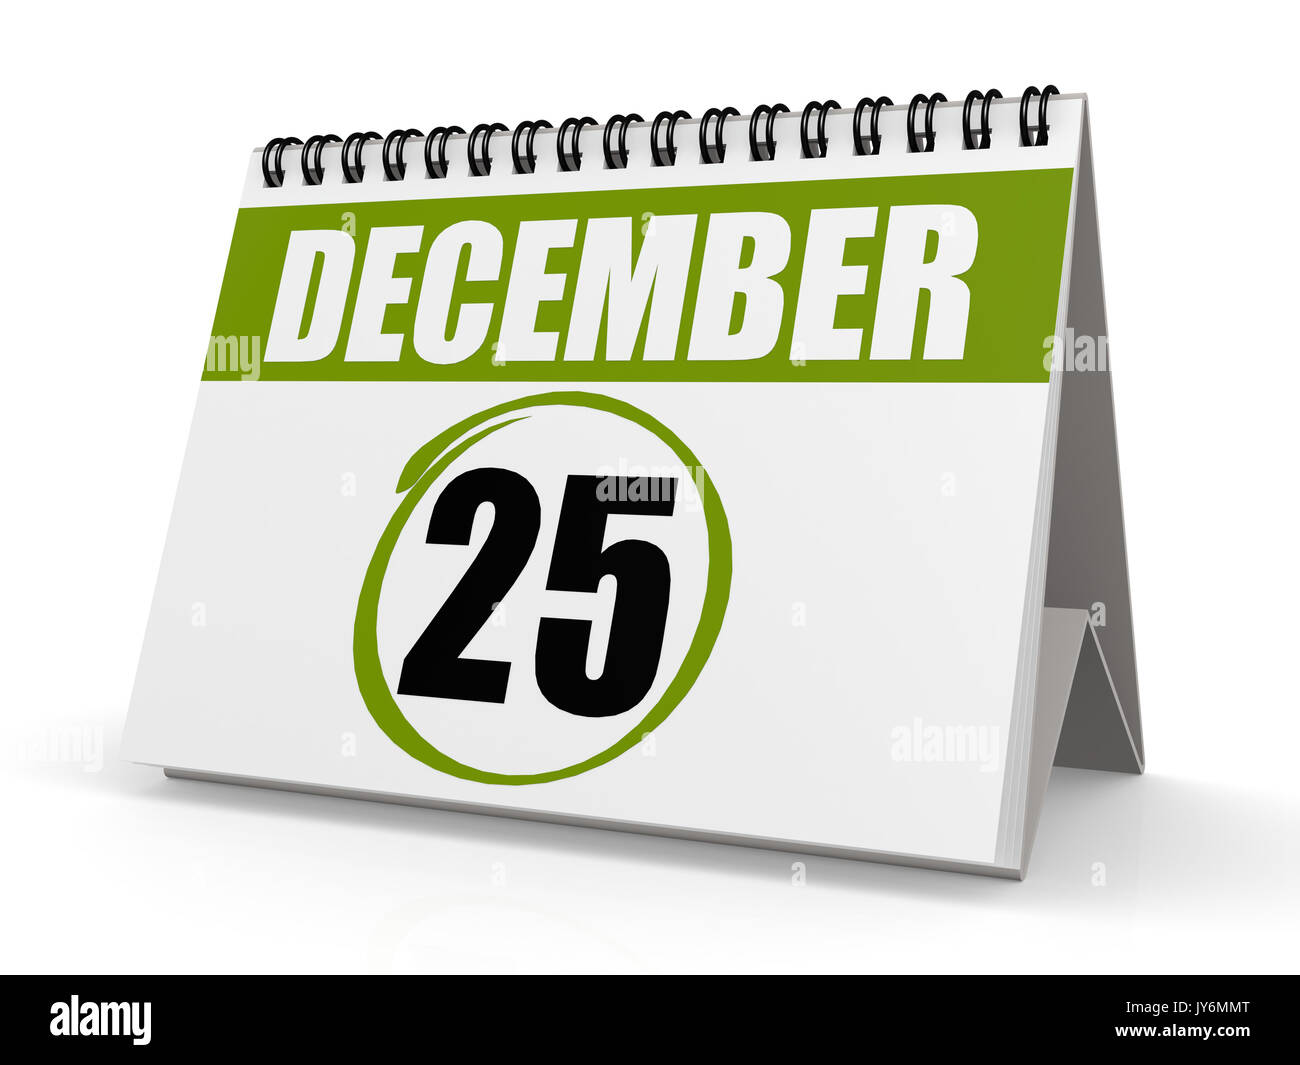 December 25, Christmas image with hi-res rendered artwork that could be used for any graphic design. Stock Photo